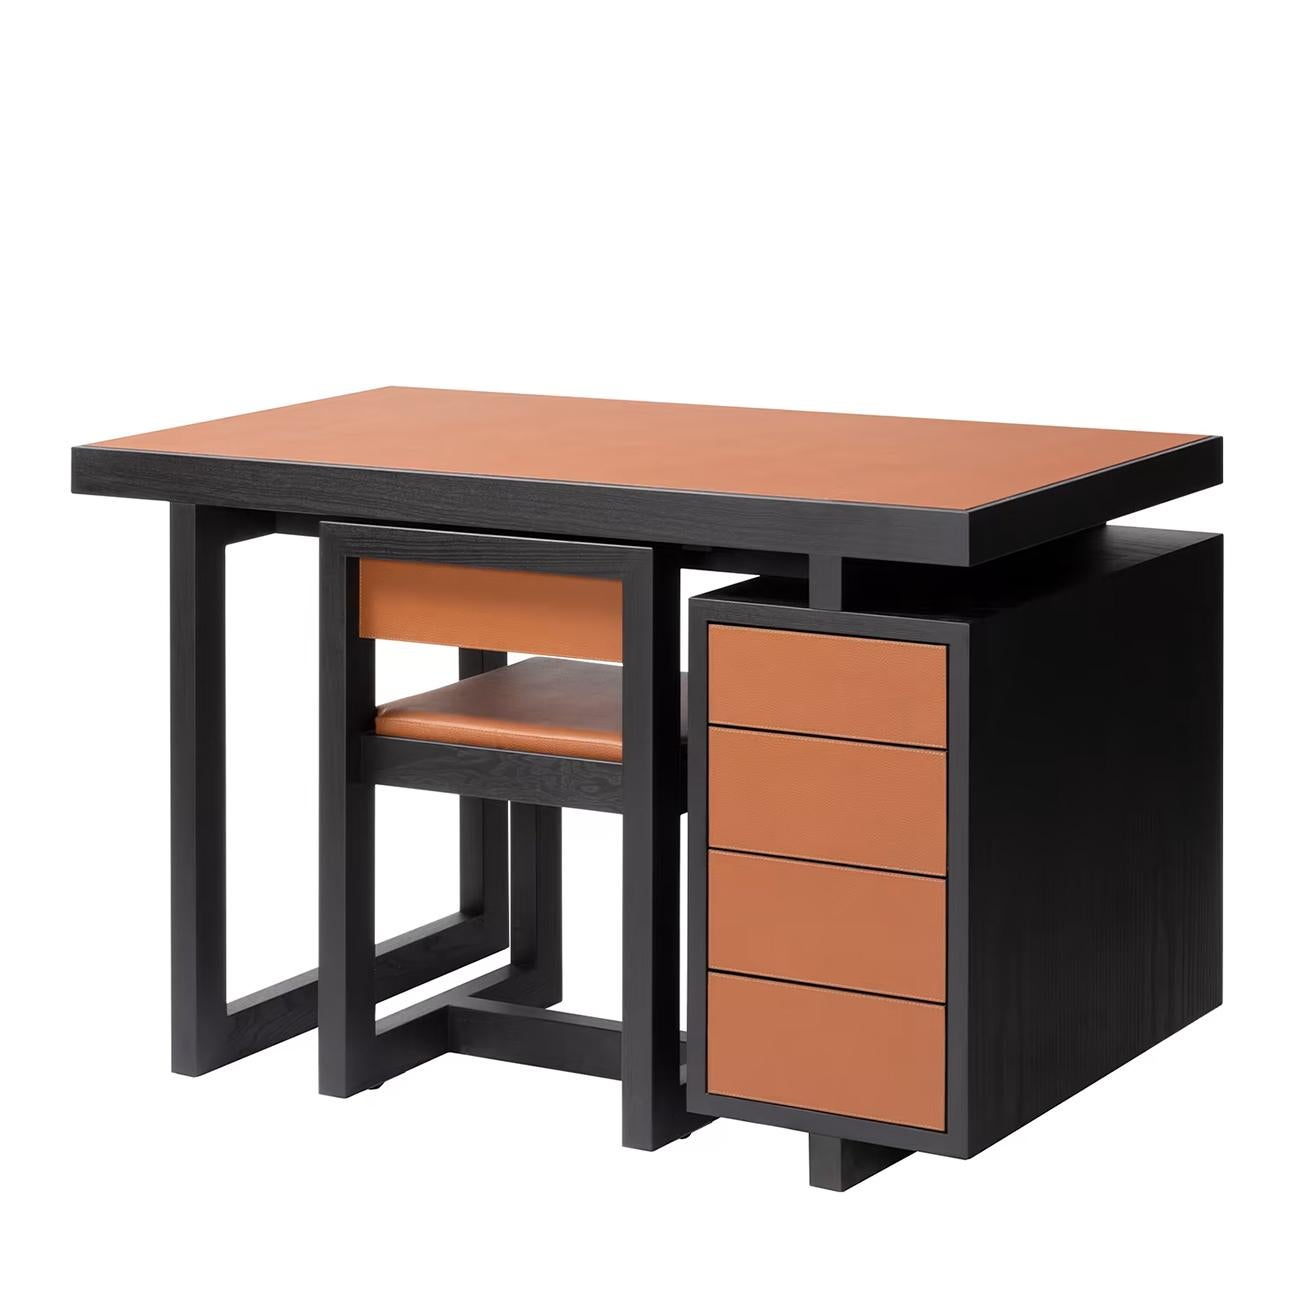 Desk with chair set Towny with all structure in solid
wood in wenge stained finish, covered with high quality
genuine leather in orange soft color finish. Desk with 4
drawers, including the desk chair also with structure in 
solid wood in wenge